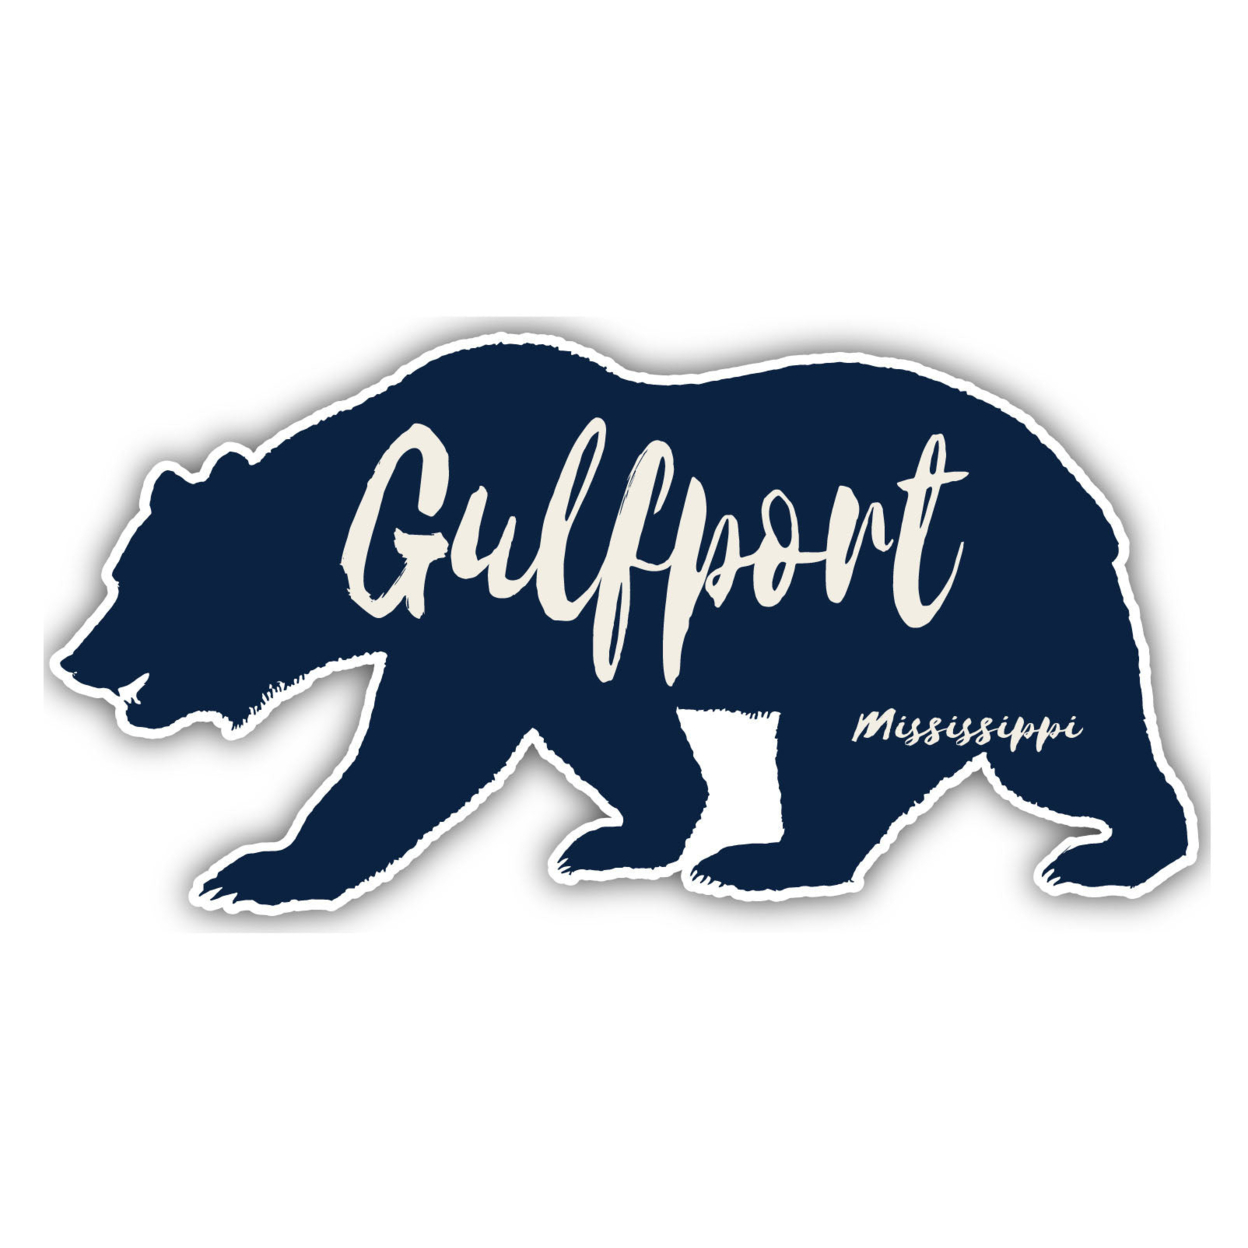 Gulfport Mississippi Souvenir Decorative Stickers (Choose Theme And Size) - Single Unit, 10-Inch, Bear